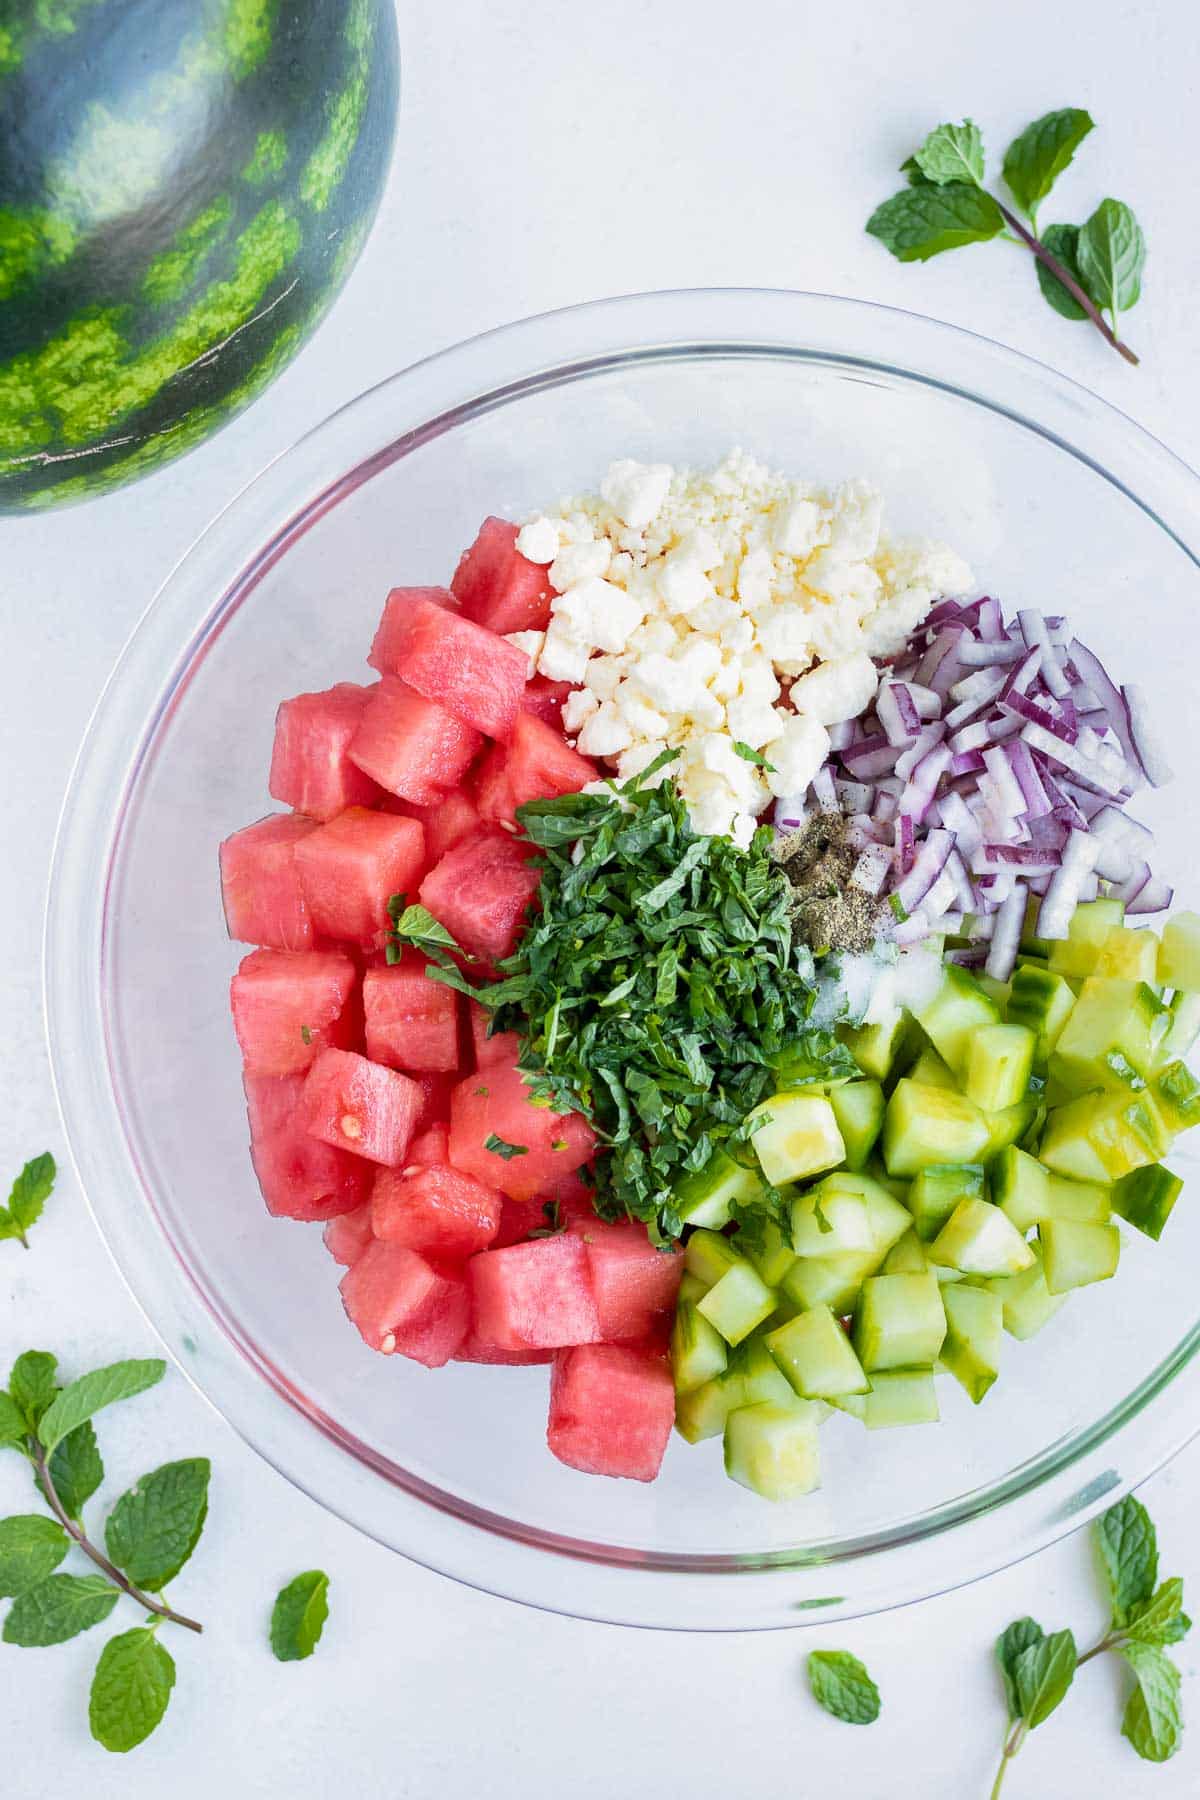 A clear glass mixing bowl full of cubed watermelon, feta cheese crumbles, red onion, cucumbers, and chopped sweet mint.